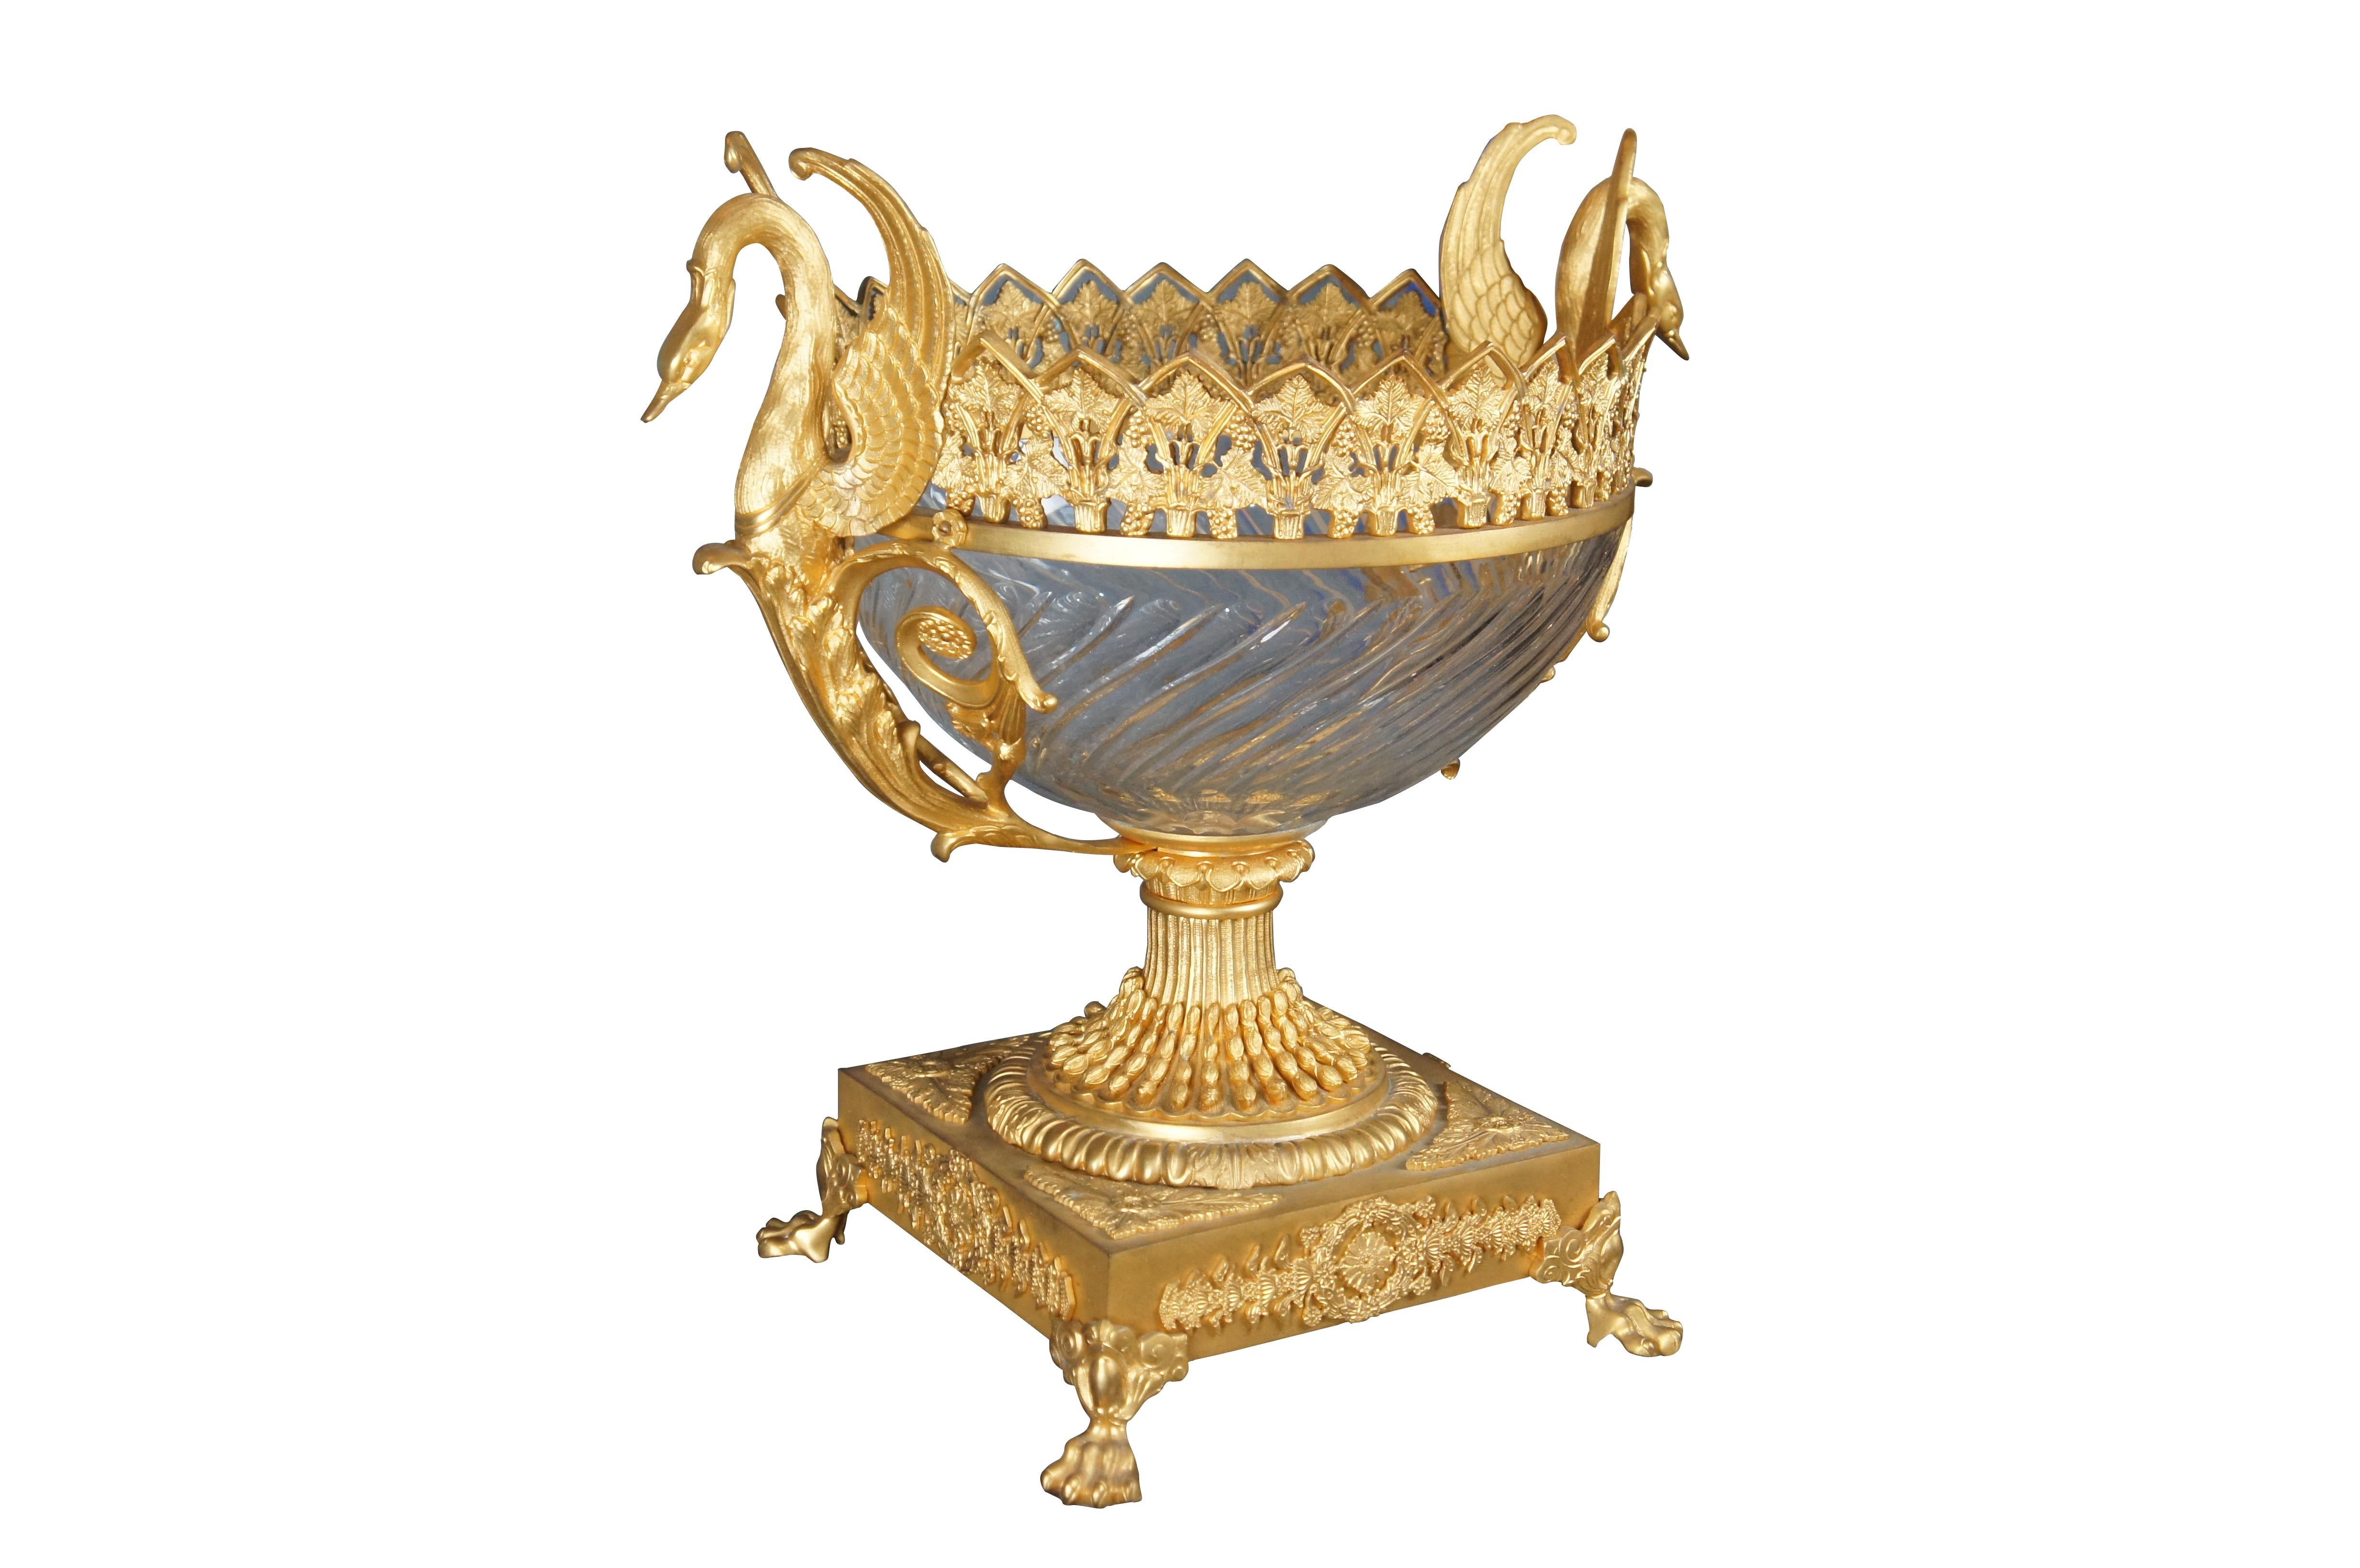 Late 20th Century Eric Stepniewski French Louis XV style Ormolu & Crystal Footed Champagne Chiller / Compote / Centerpiece Bowl / Vase. Features a regal 24k gold finished body with interlaced sawtooth rim over grapevine motif, flanked by figural